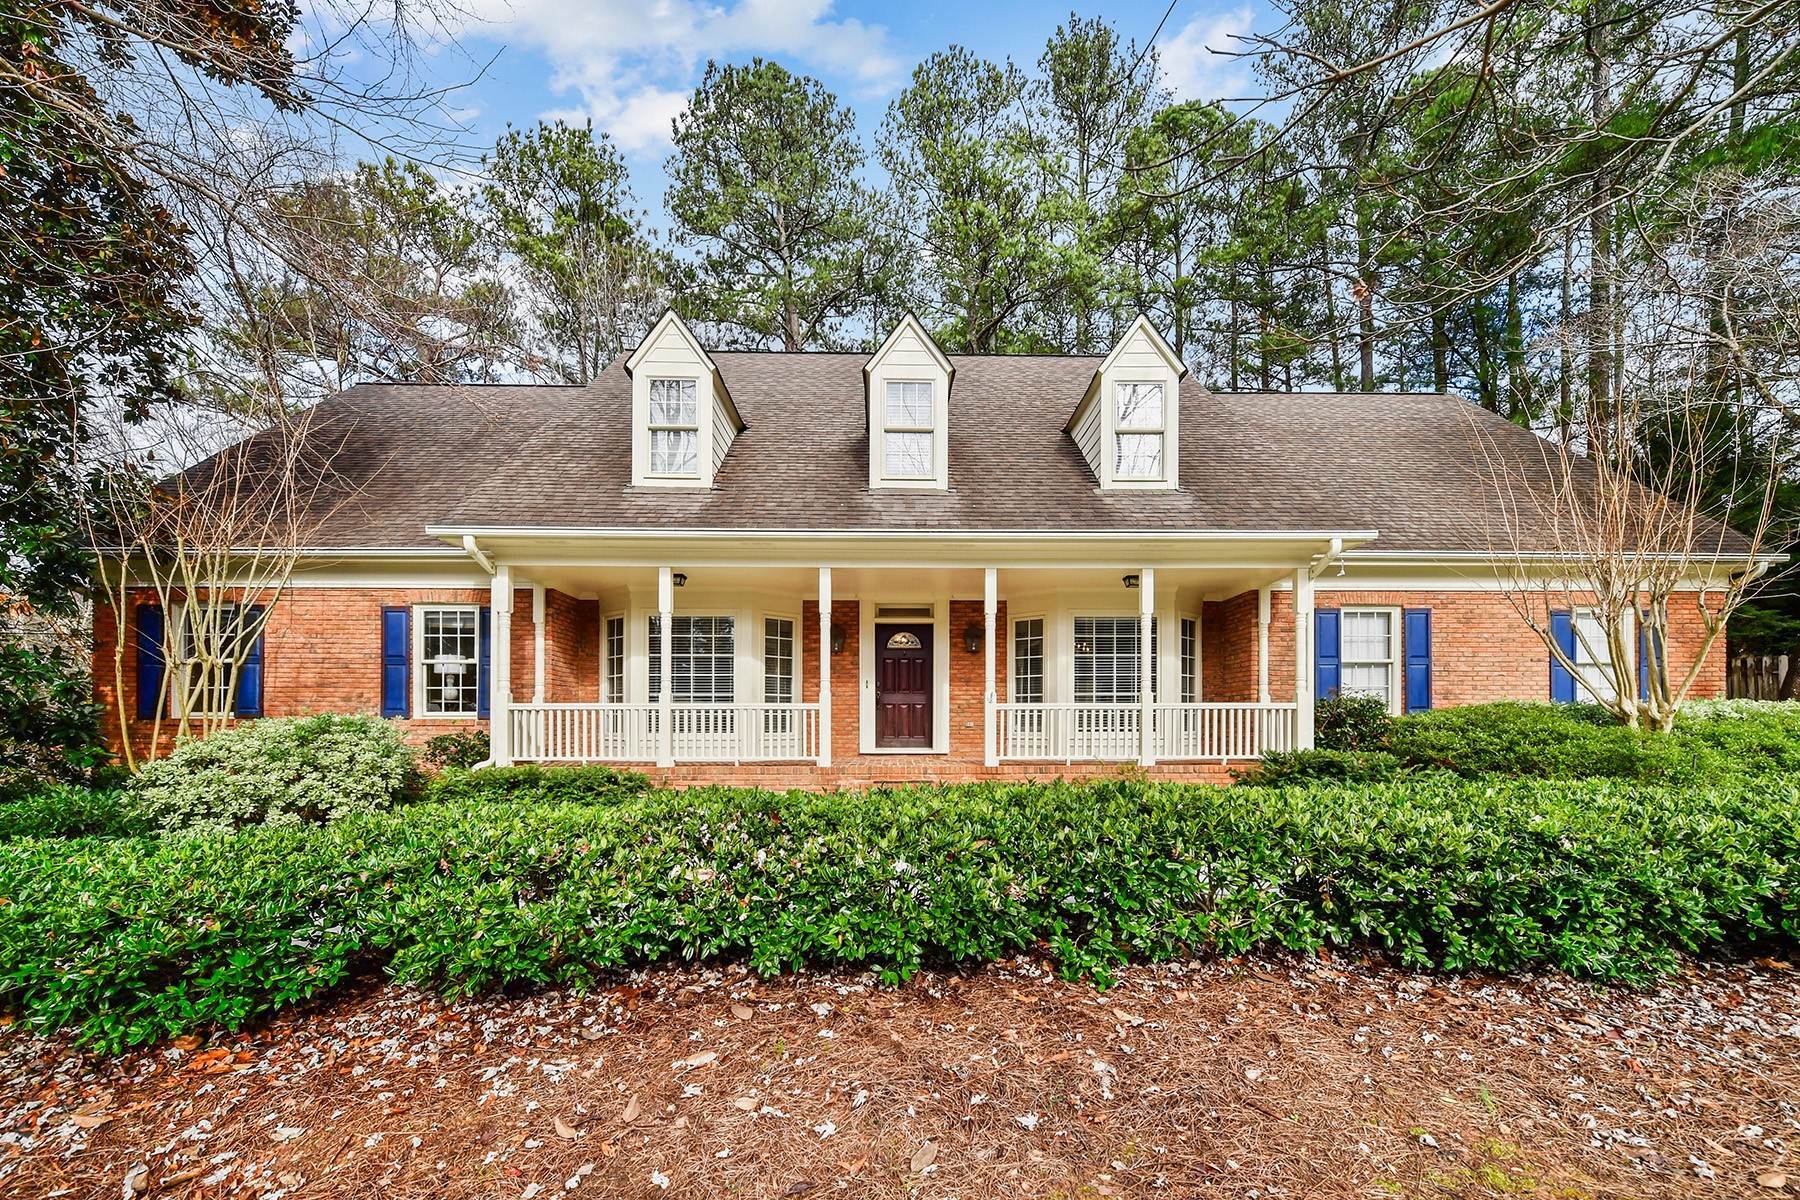 Single Family Homes for Sale at Appealing Cape Cod Style Home 590 Spindlewick Drive Sandy Springs, Georgia 30350 United States